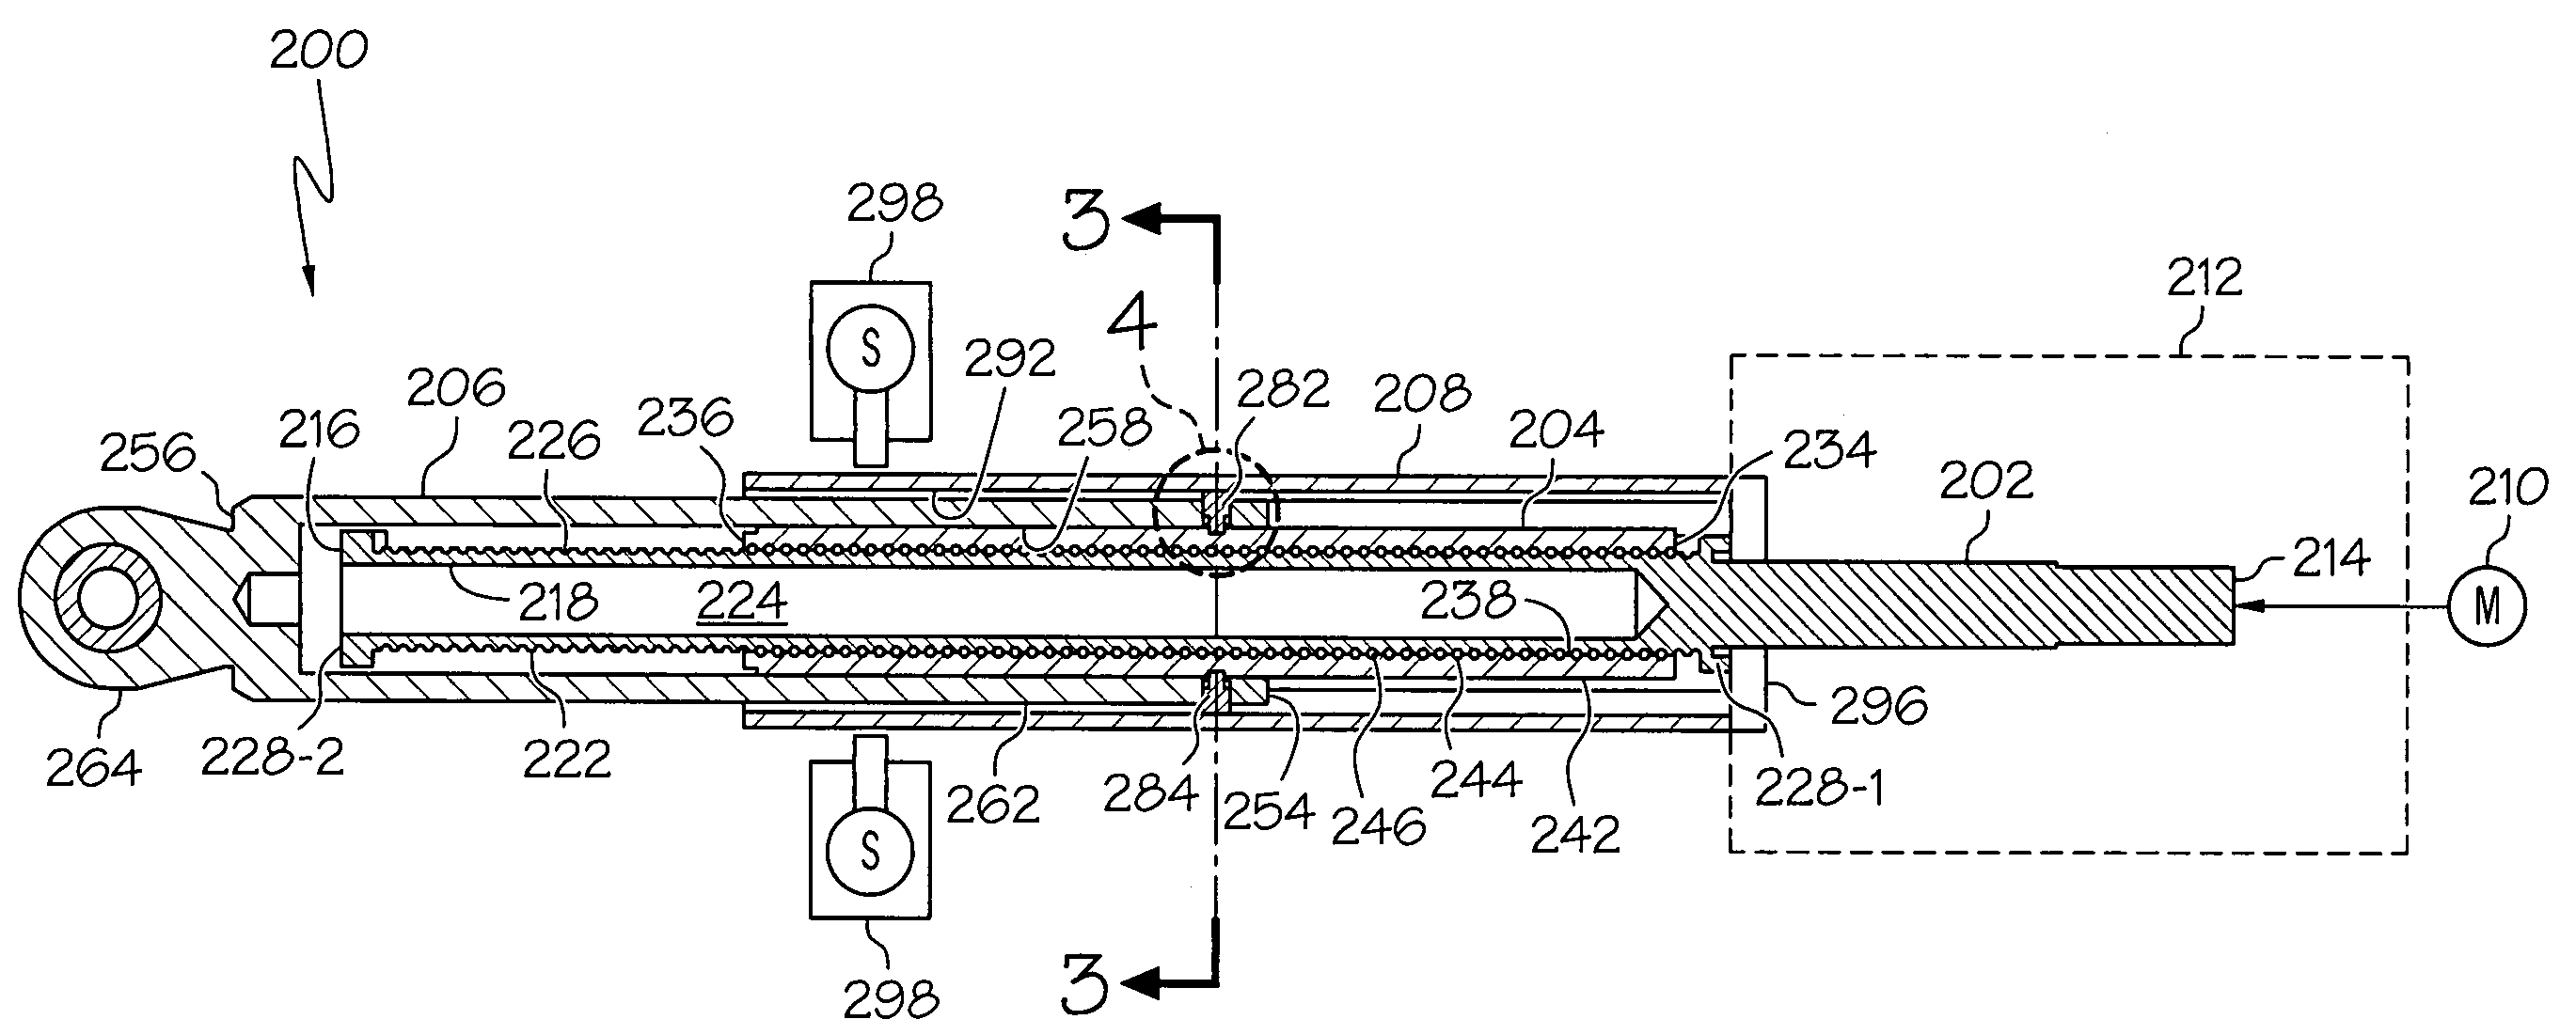 Flight control surface actuator assembly including a free trial mechanism